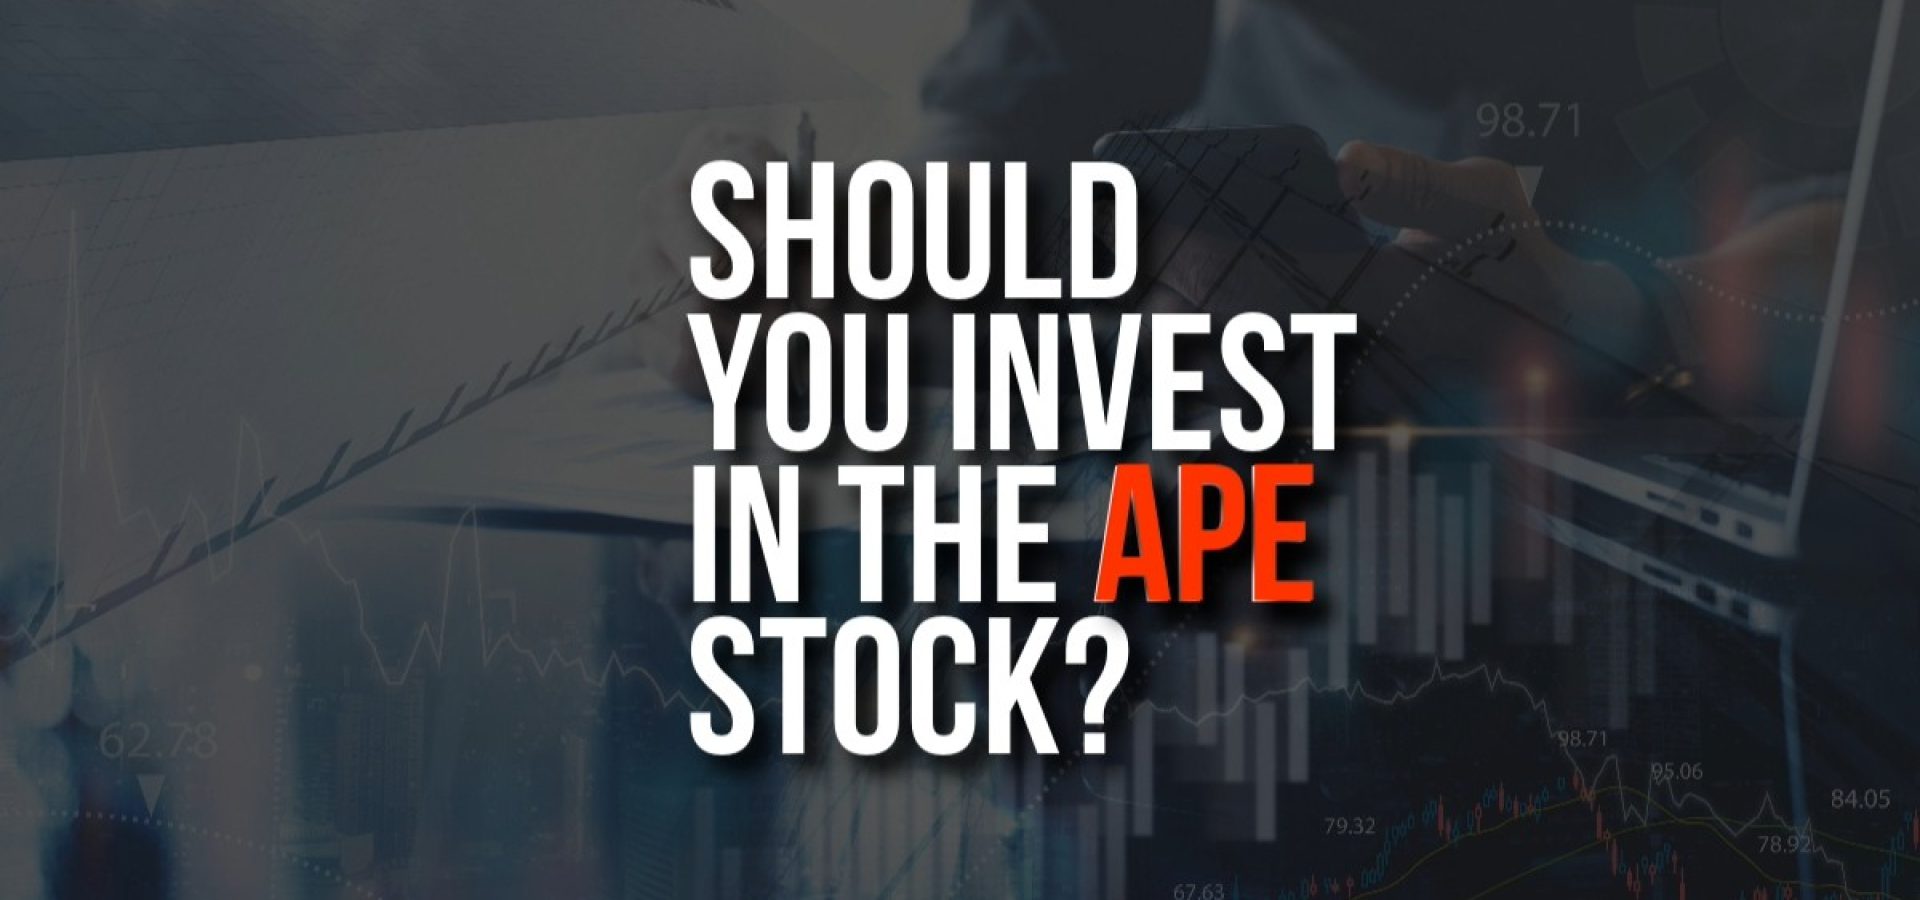 Should you invest in the APE stock according to experts? 